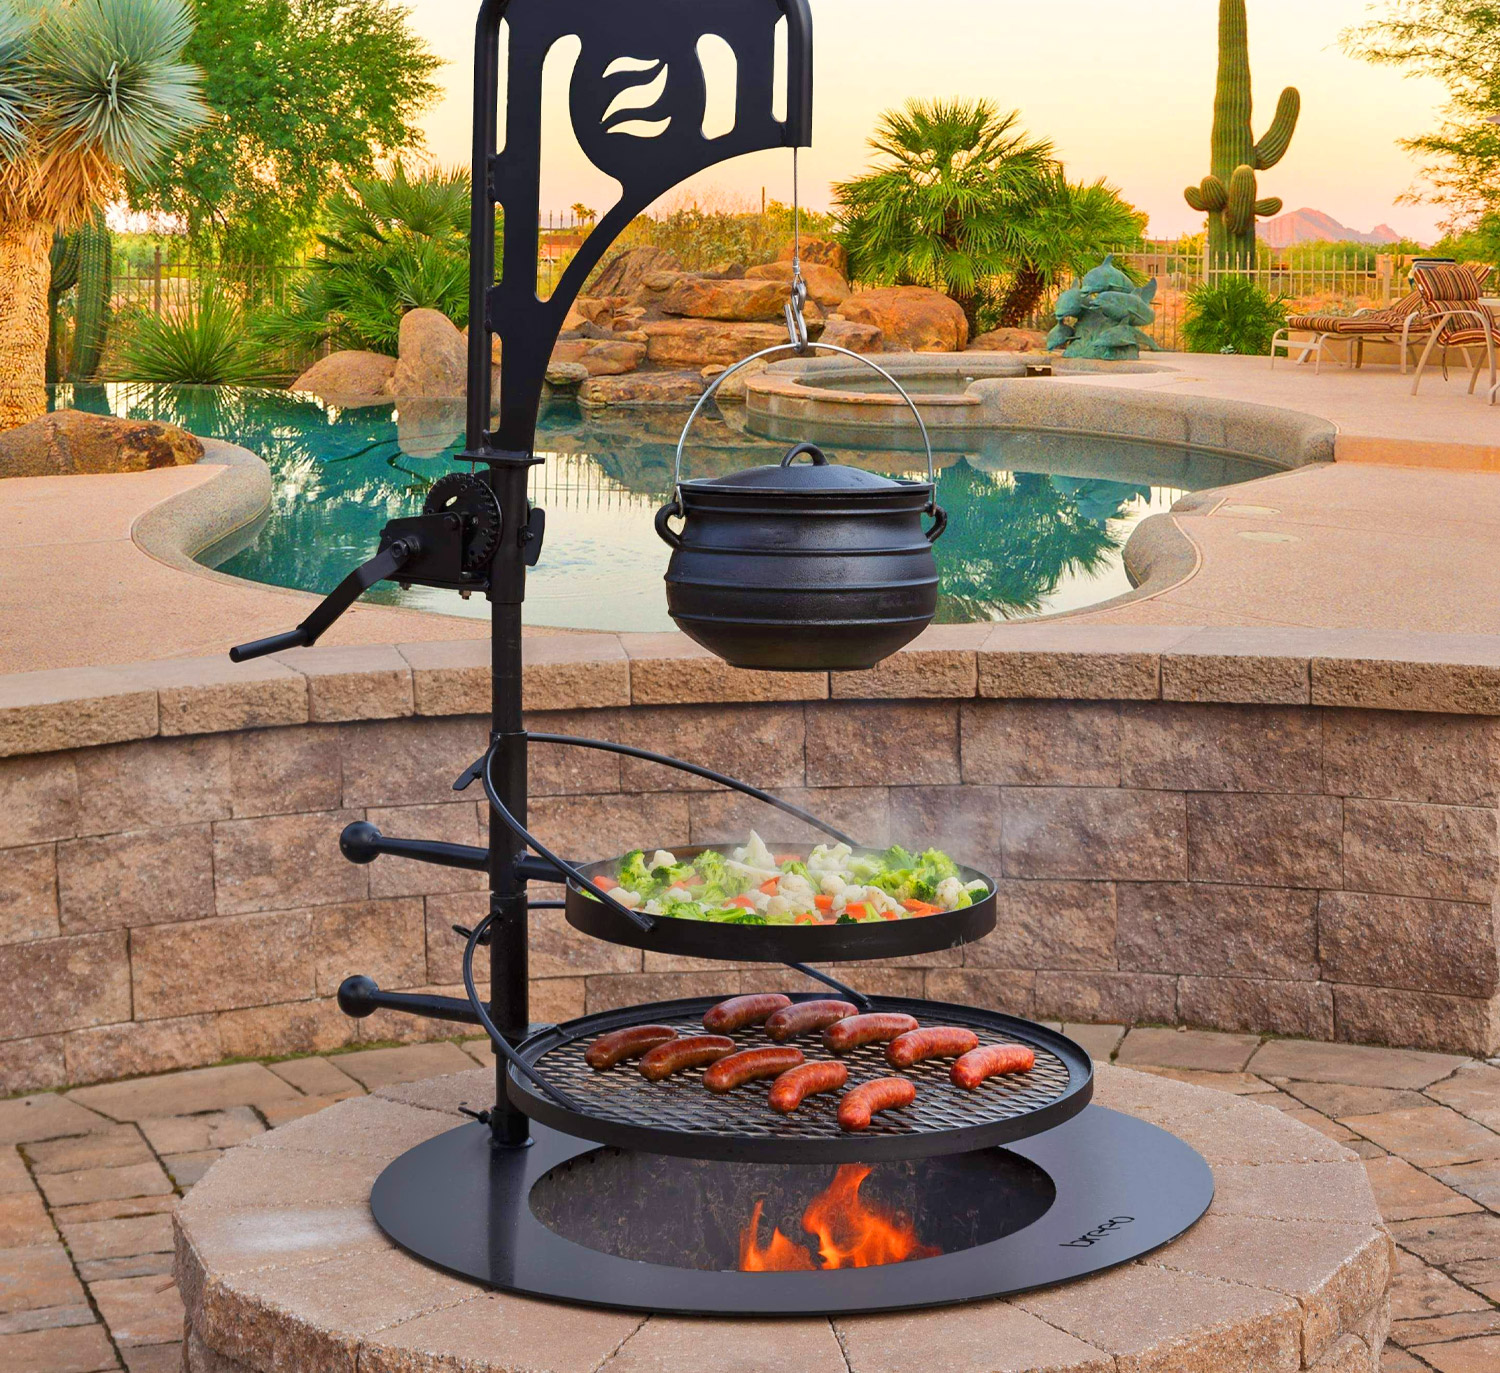 Fire Pit Into A Tiered Cooking Machine, How To Cook Over A Fire Pit